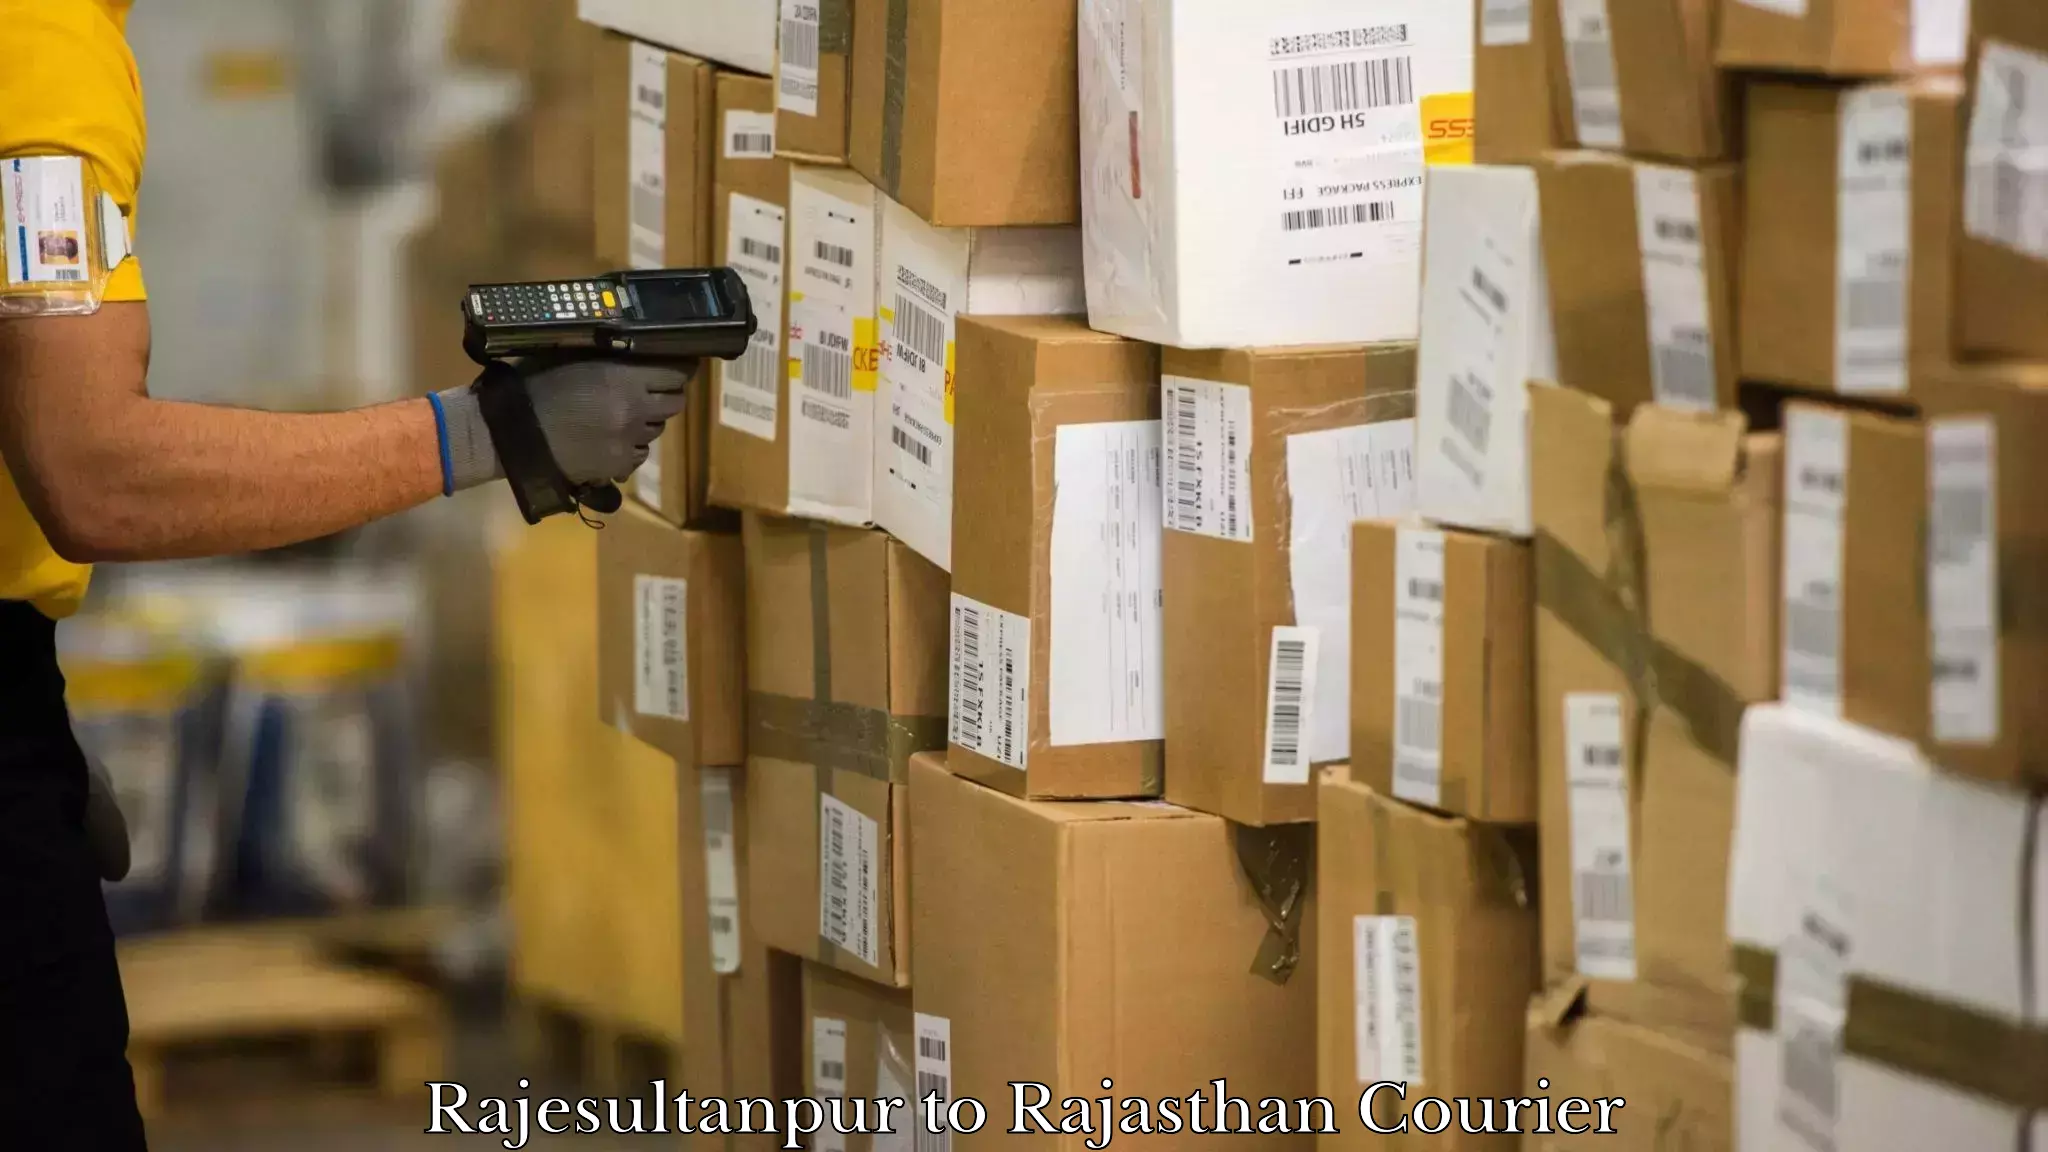 Flexible shipping options Rajesultanpur to Rajasthan